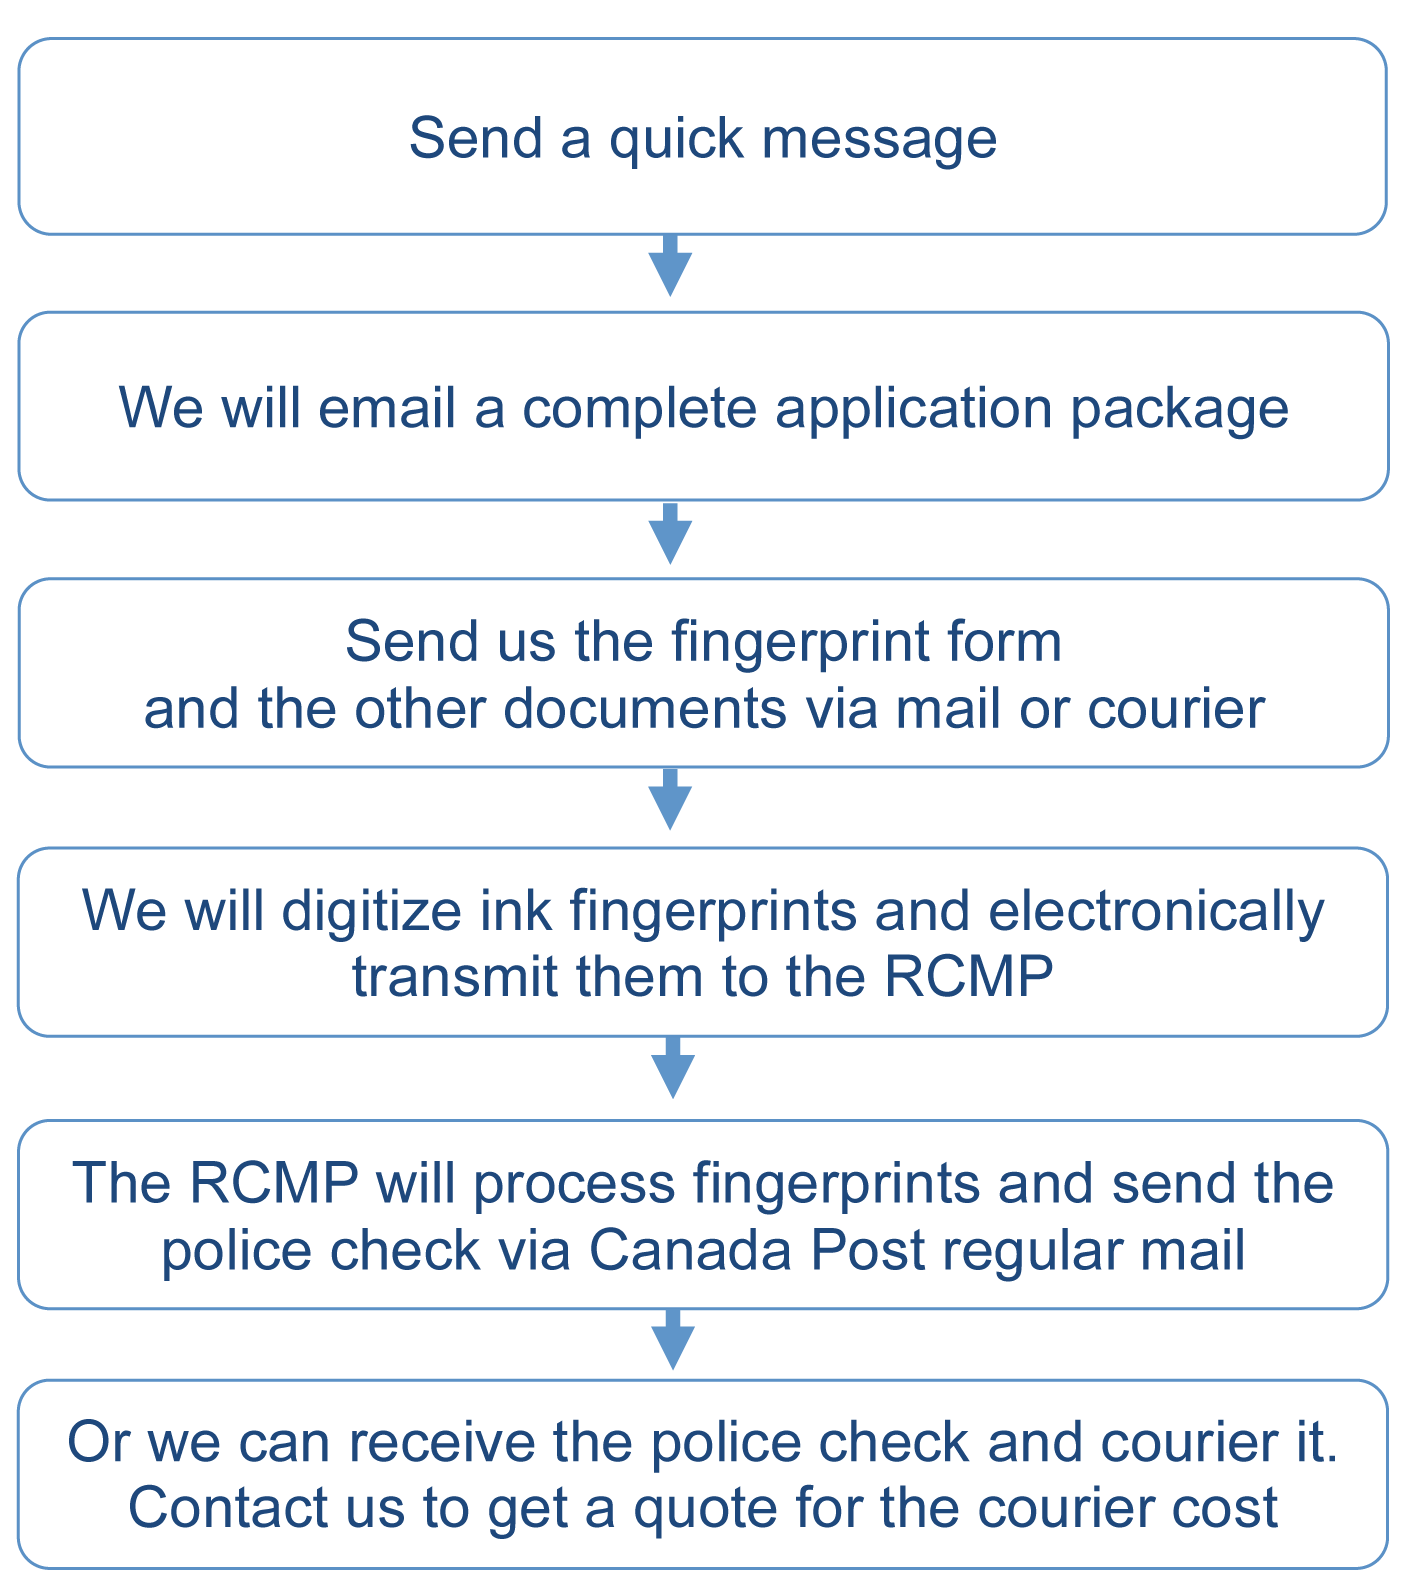 Fingerprinting United Kingdom. Apply for a Canadian Police Clearance from the UK